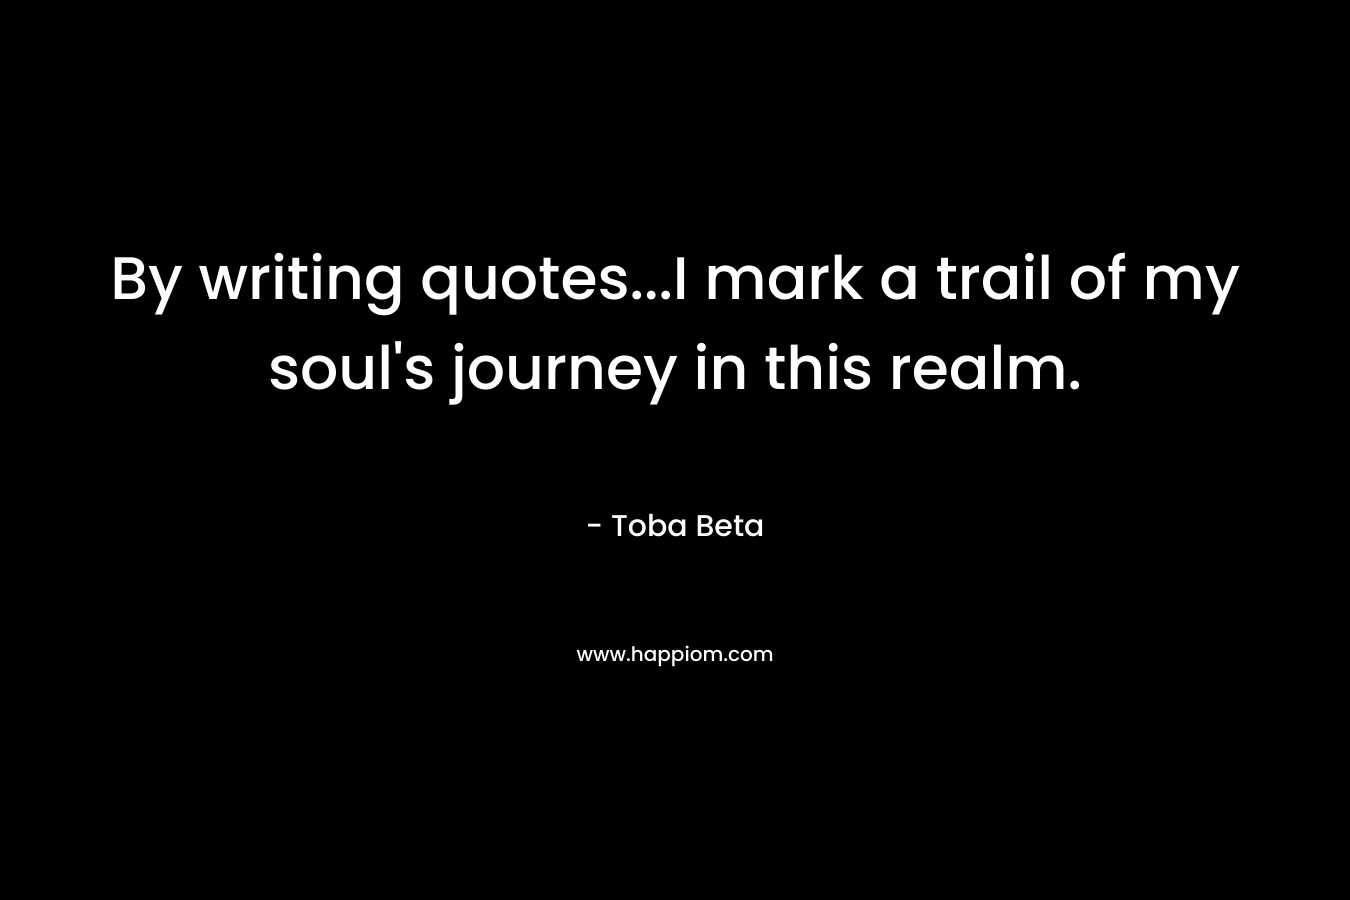 By writing quotes…I mark a trail of my soul’s journey in this realm. – Toba Beta